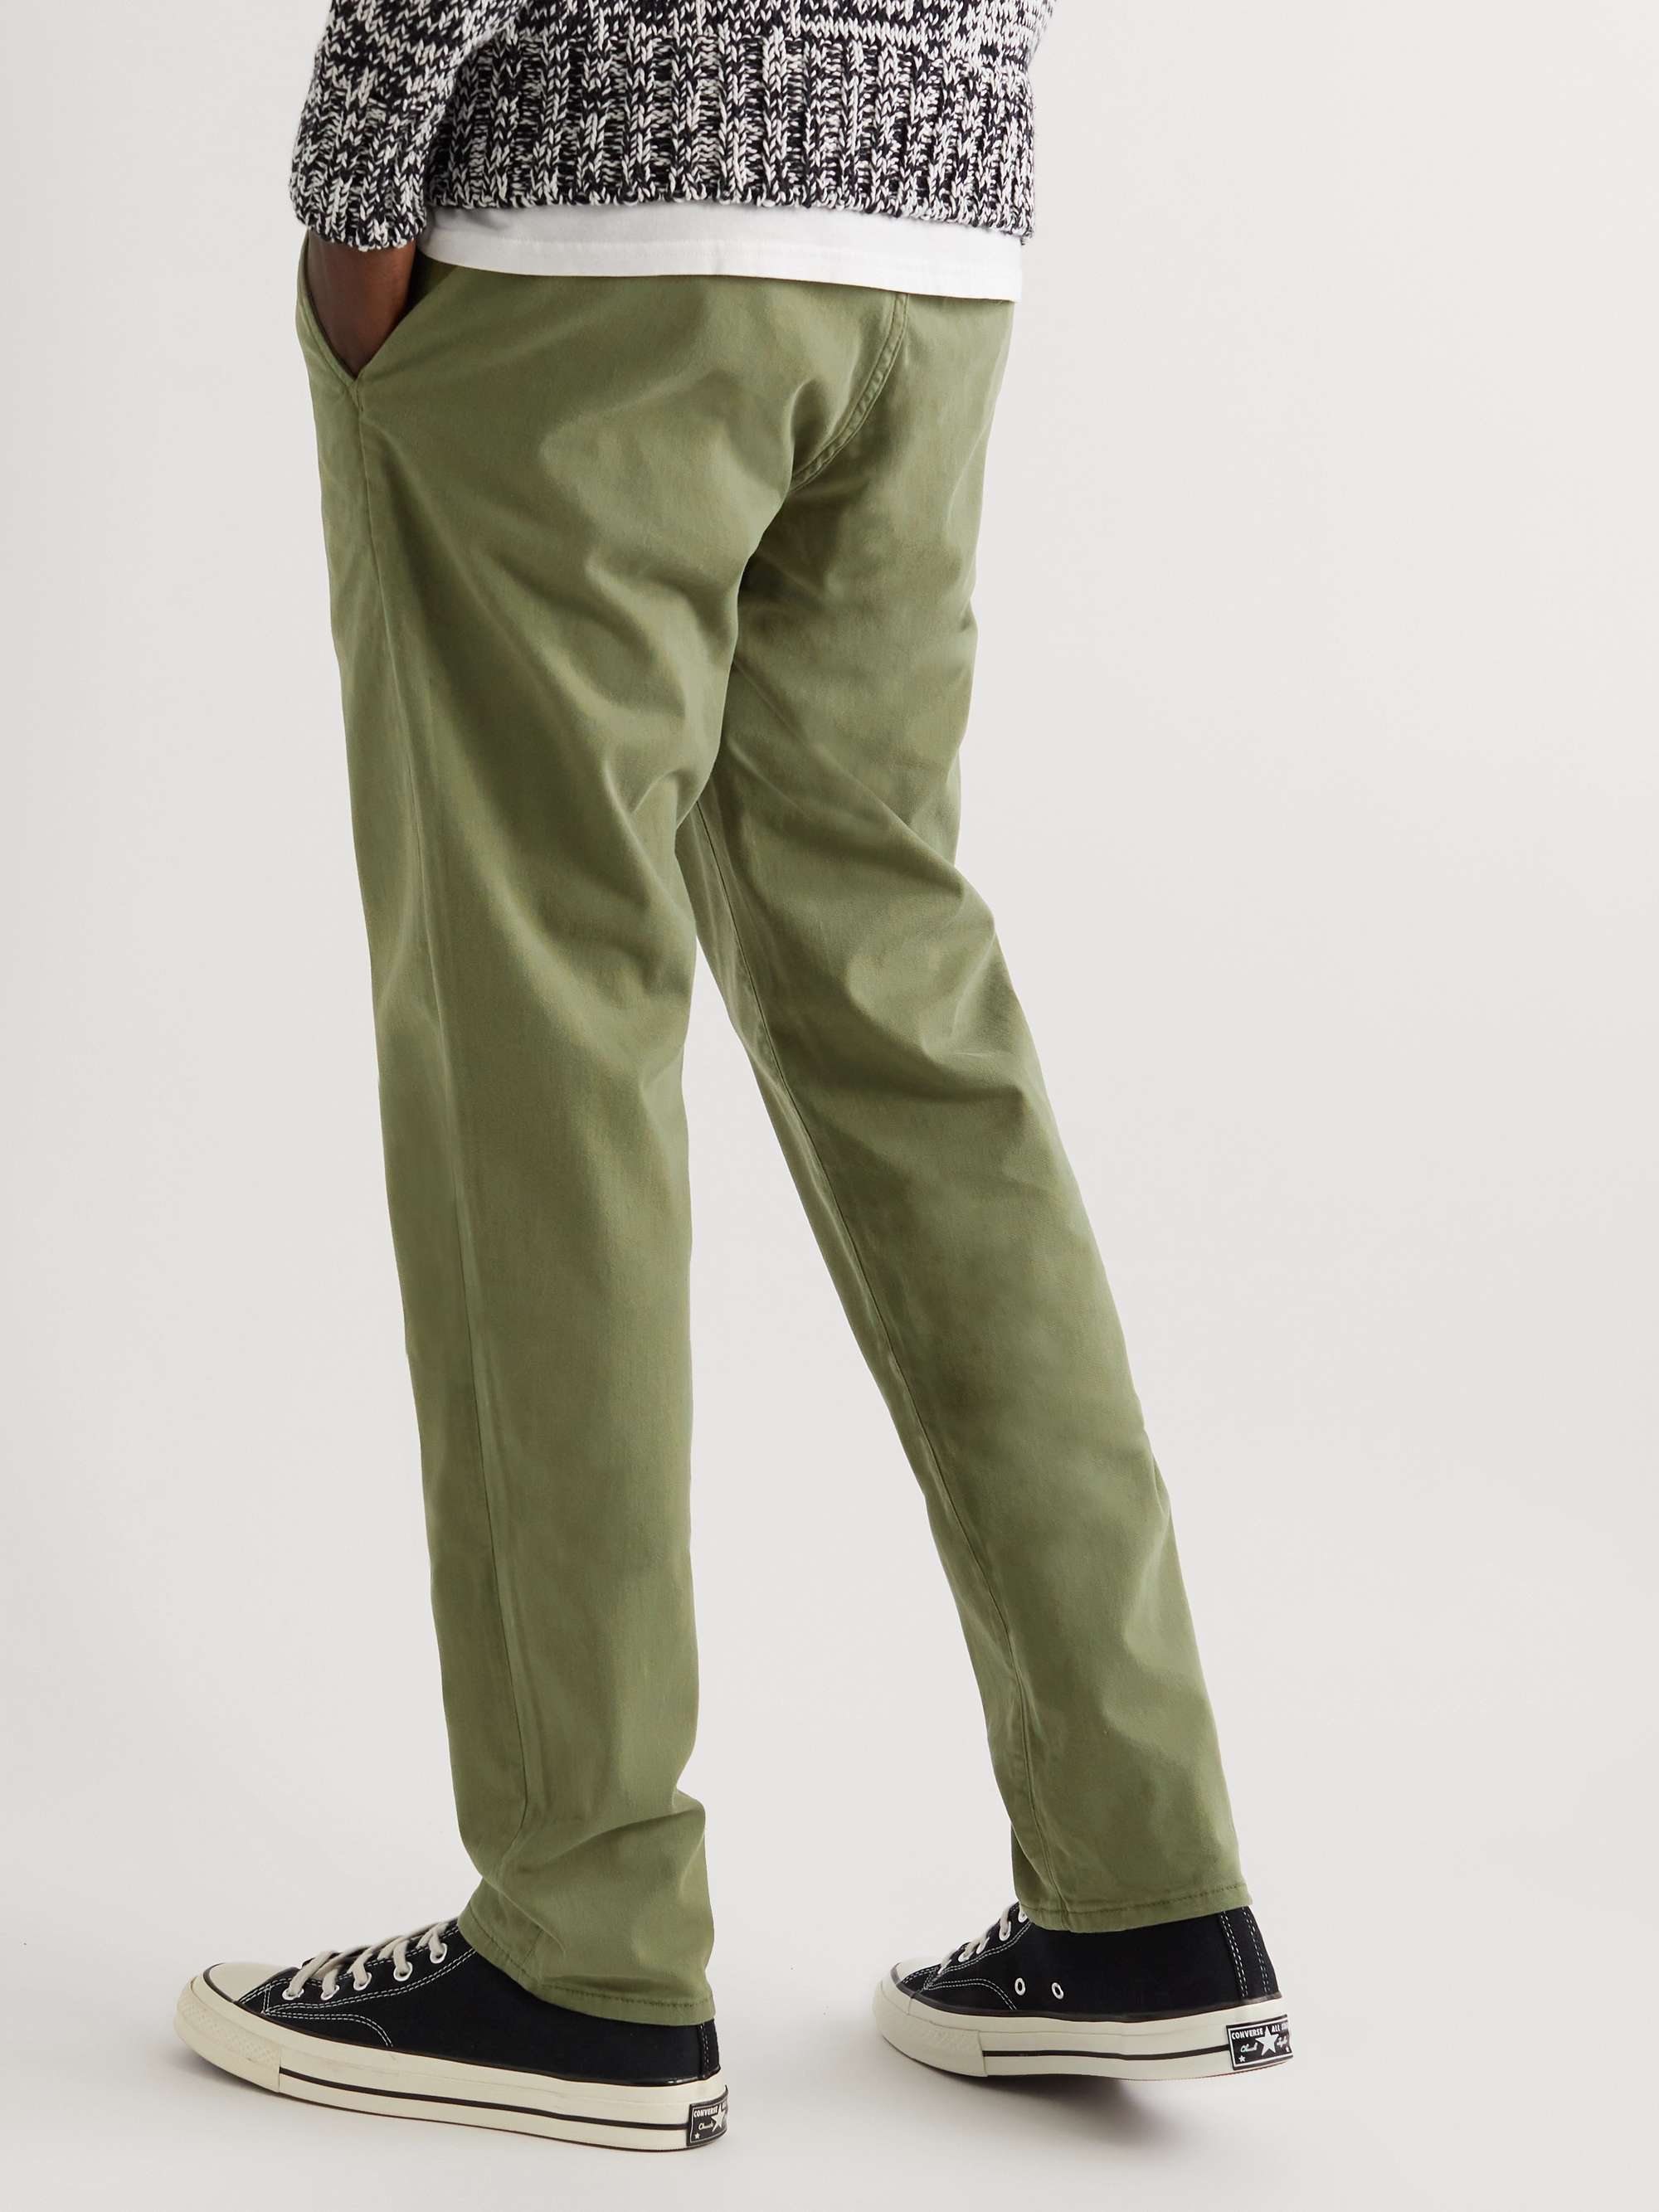 Fit 2 Slim-Fit Garment-Dyed Stretch-Cotton Twill Chinos